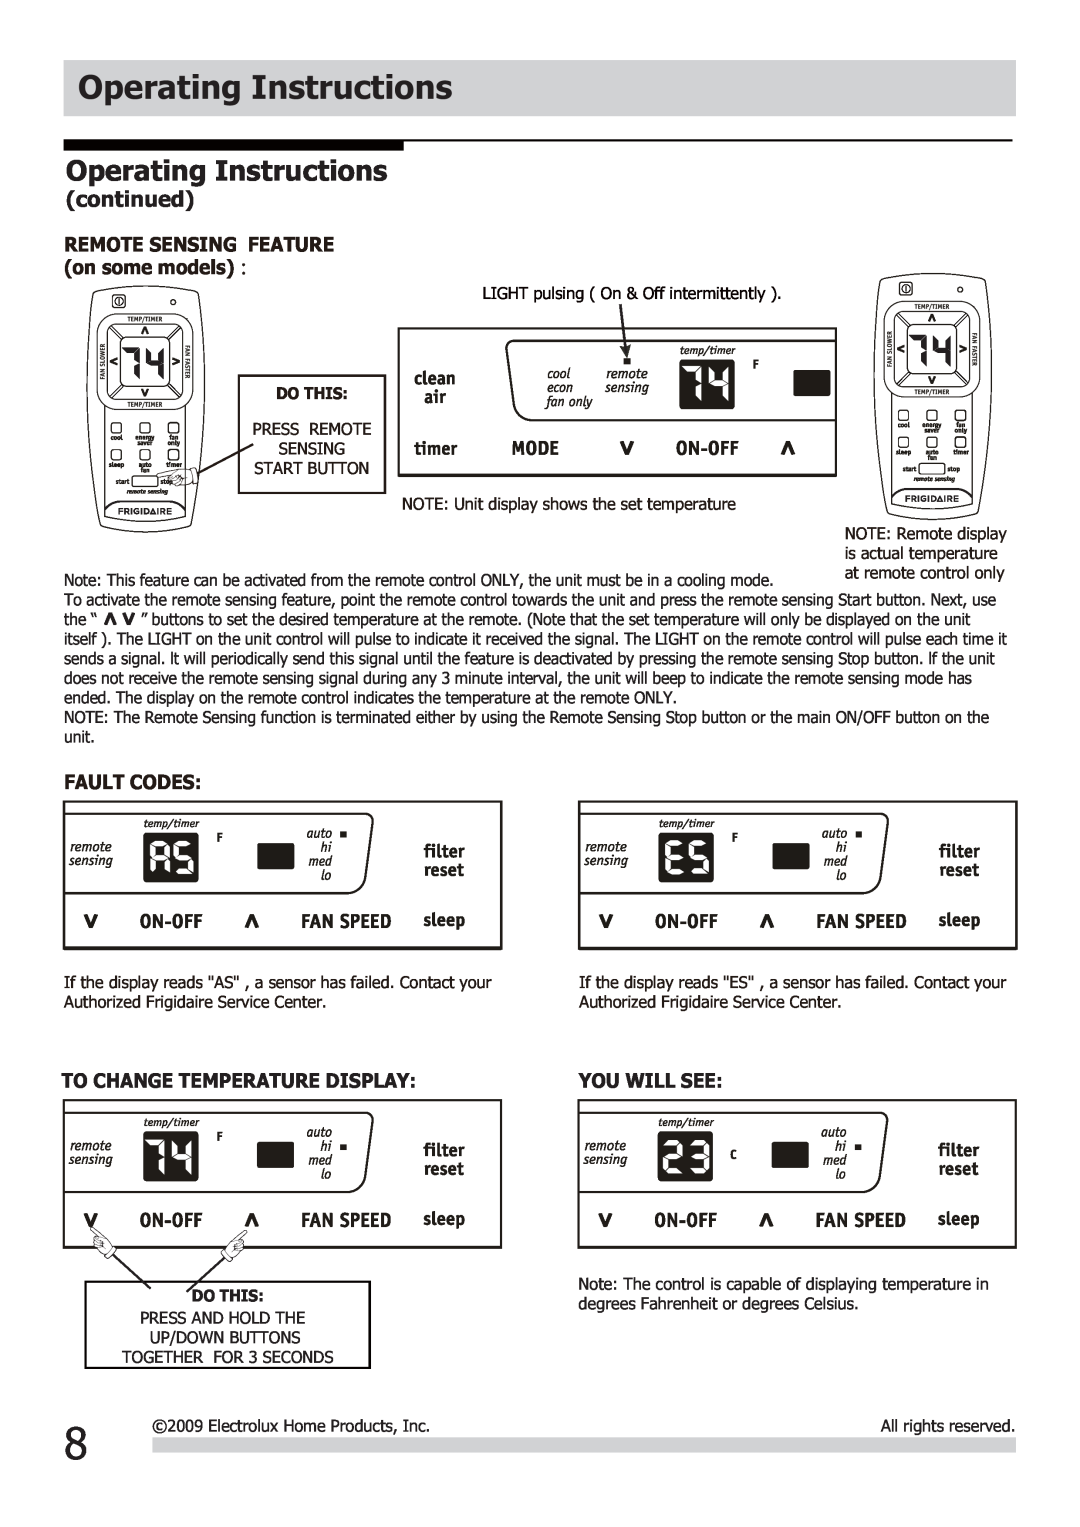 Frigidaire FRA103BT1 Fault Codes, To Change Temperature Display, Operating Instructions, continued, You Will See, Do This 